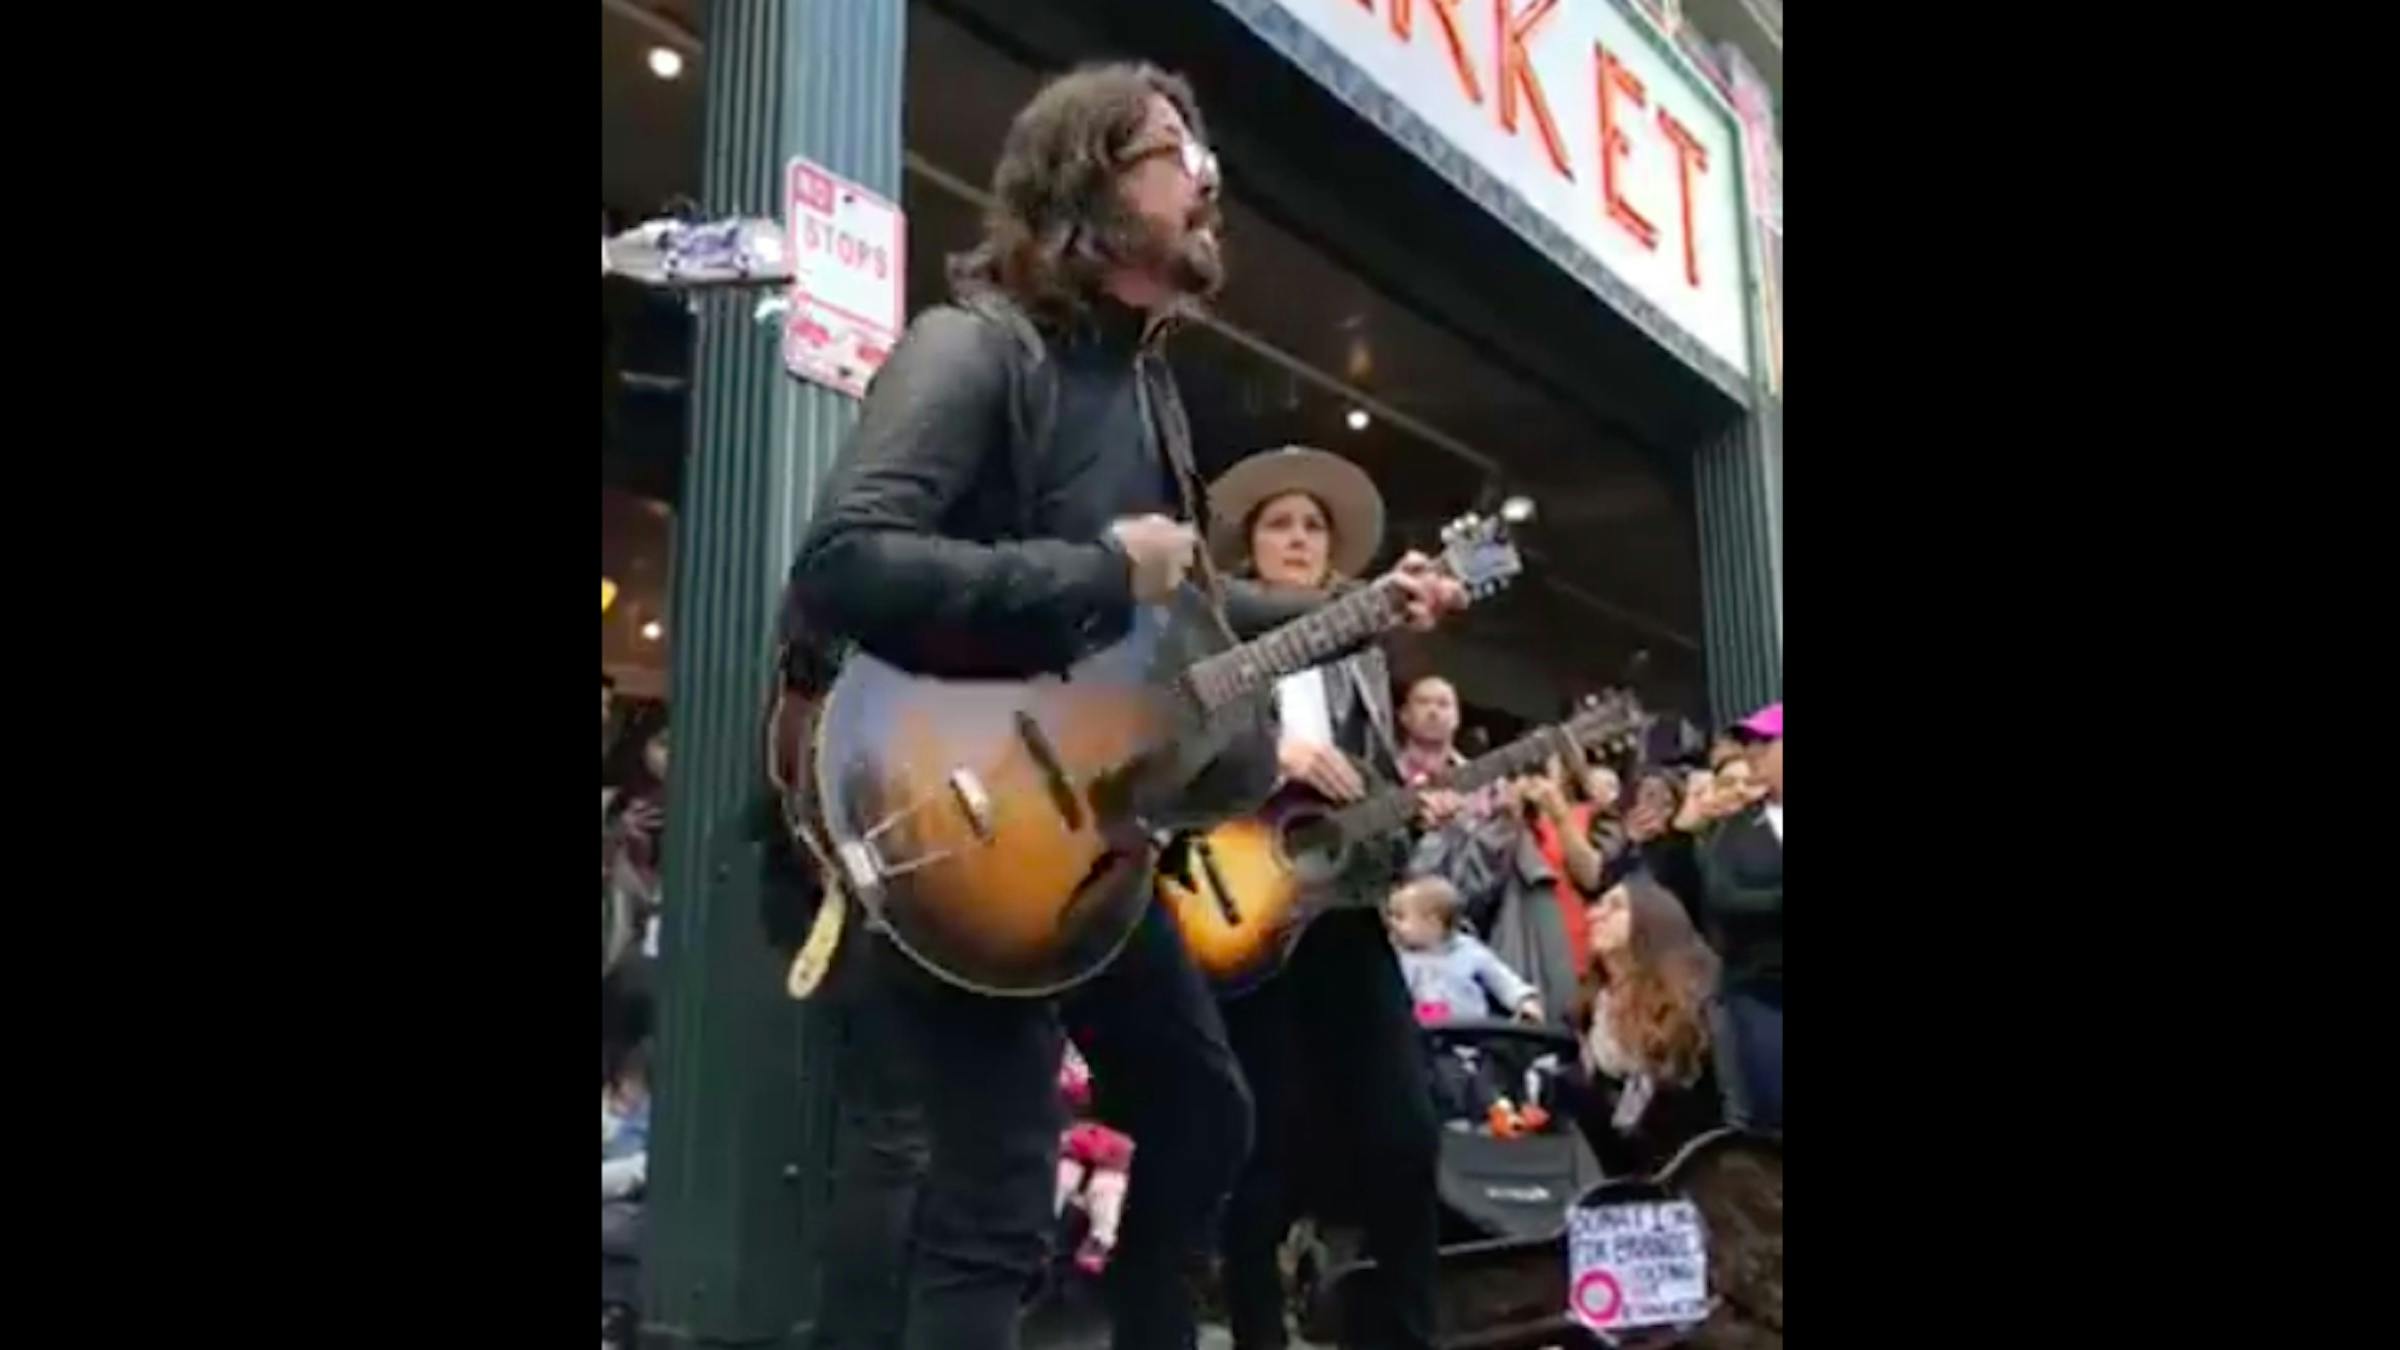 Watch Dave Grohl And Brandi Carlile Go Busking Together In Seattle